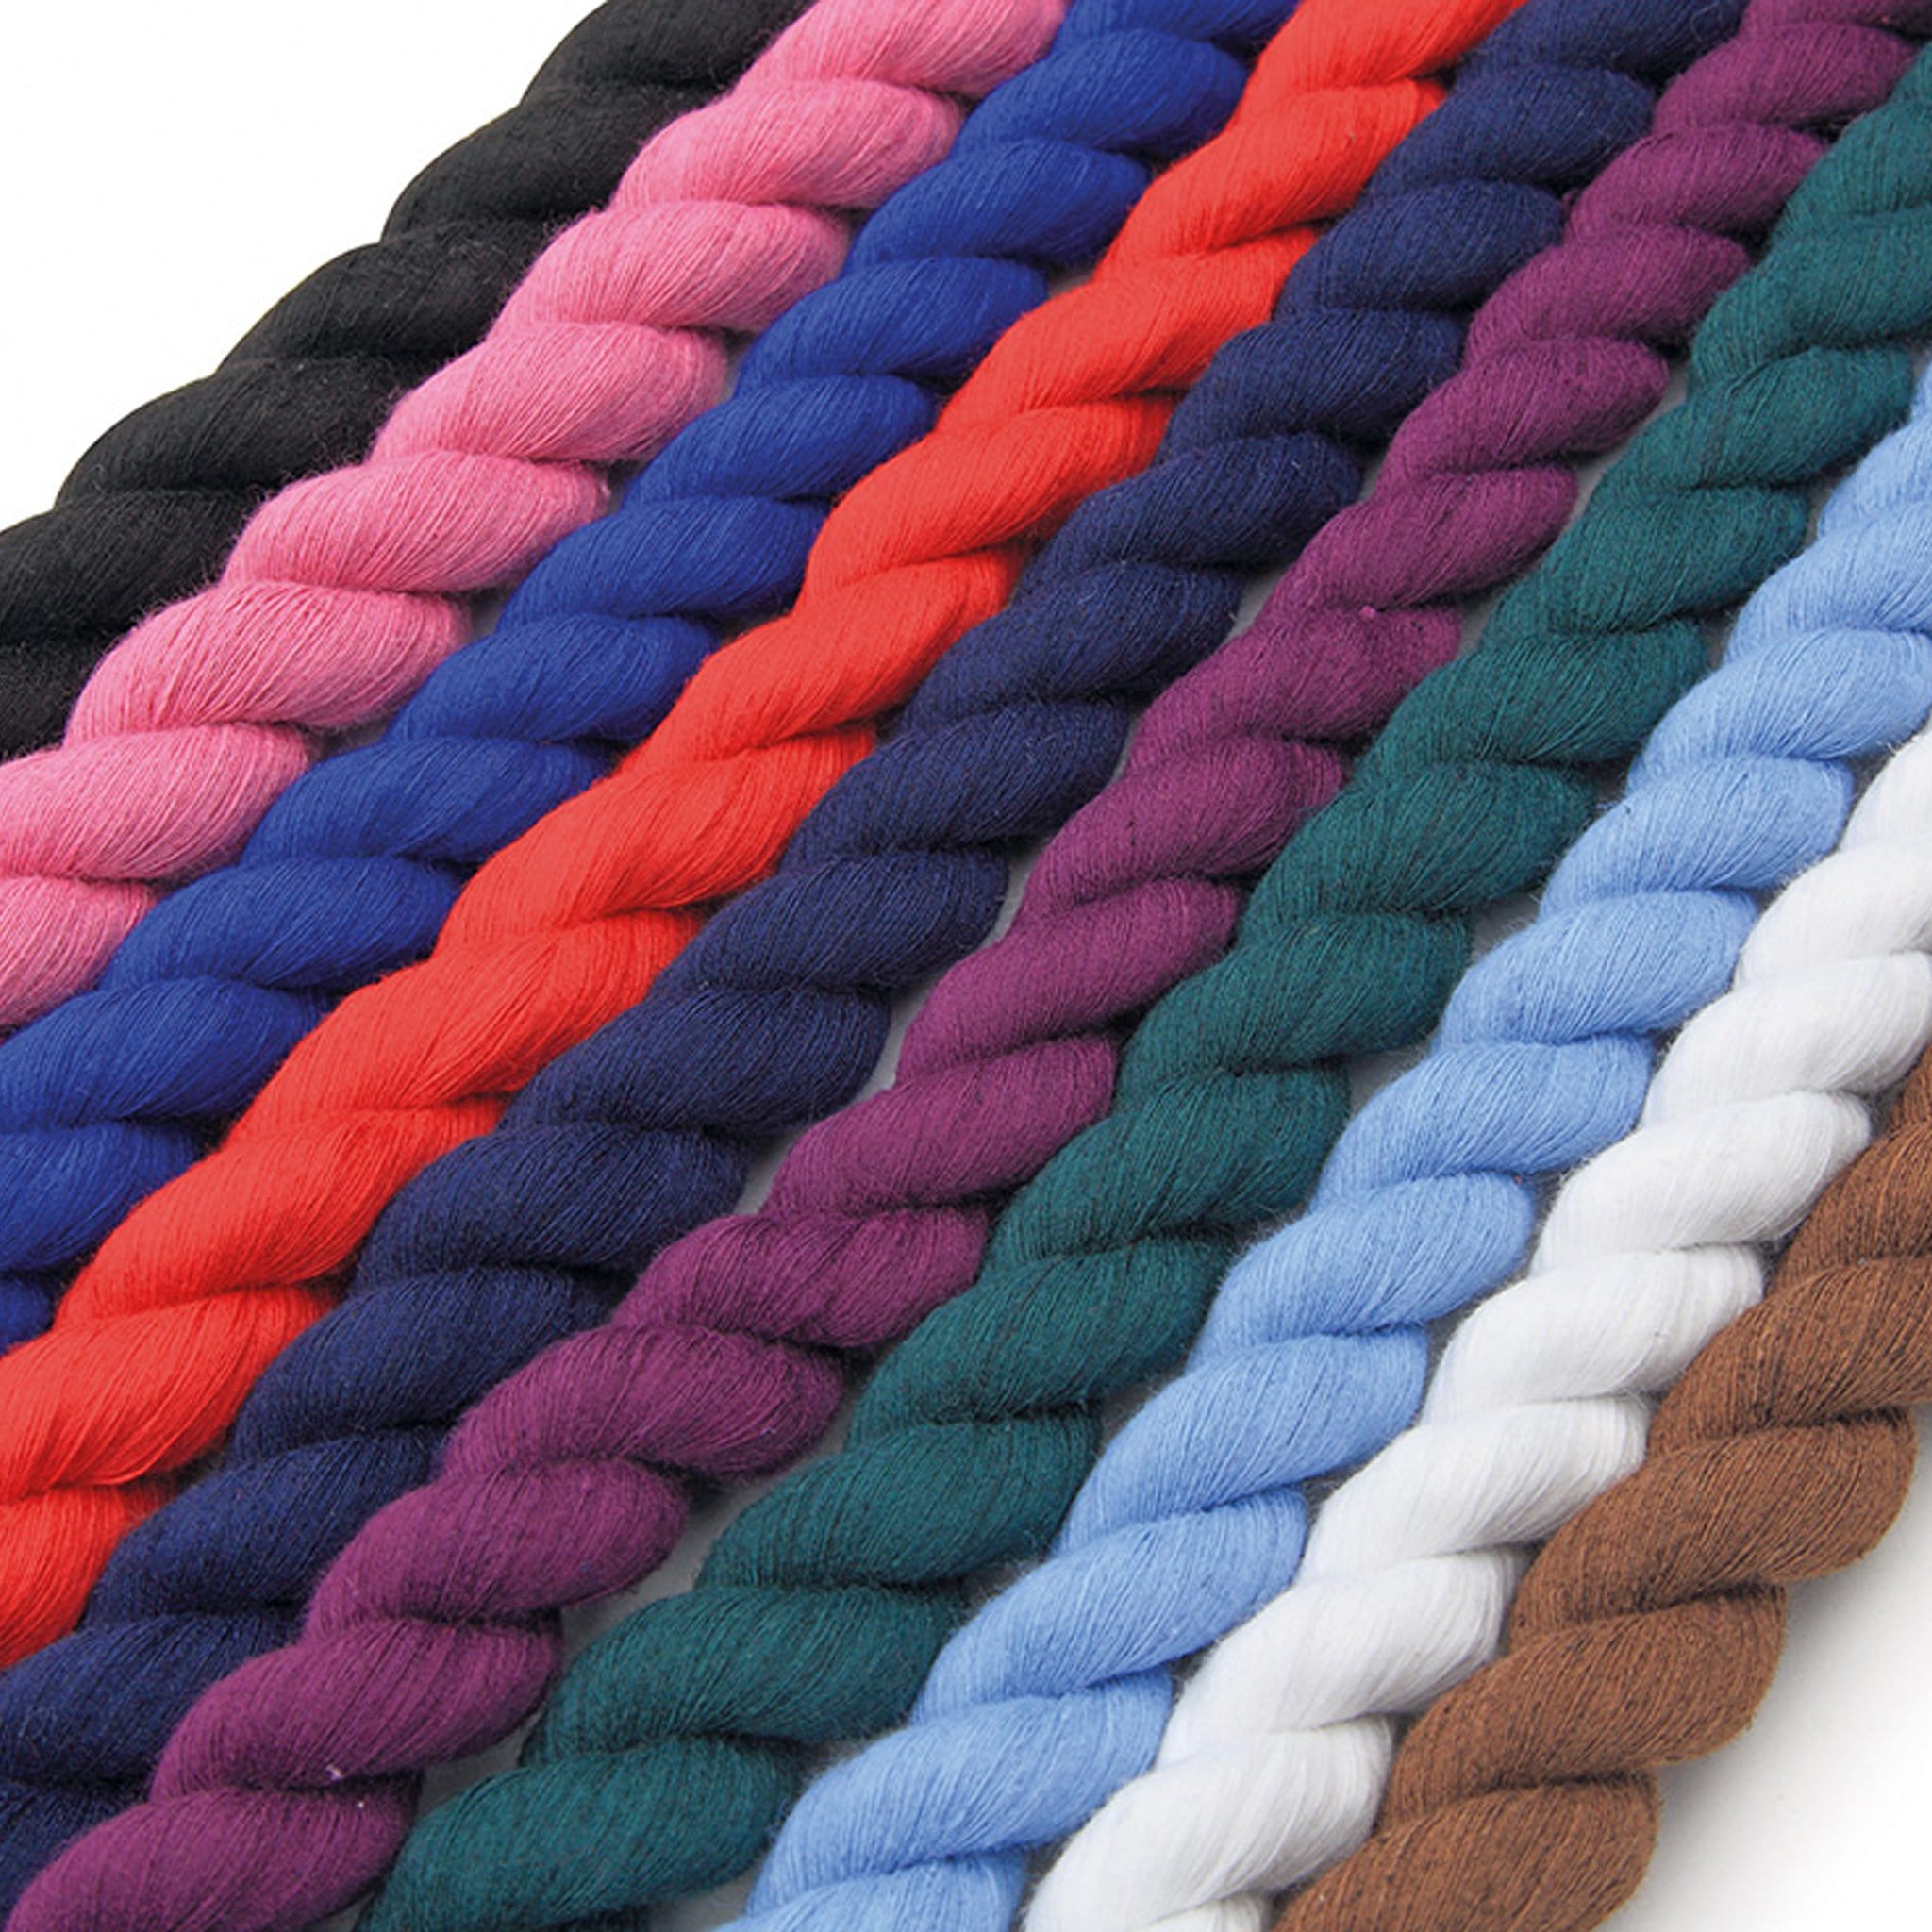 Shires Plain Lead Rope